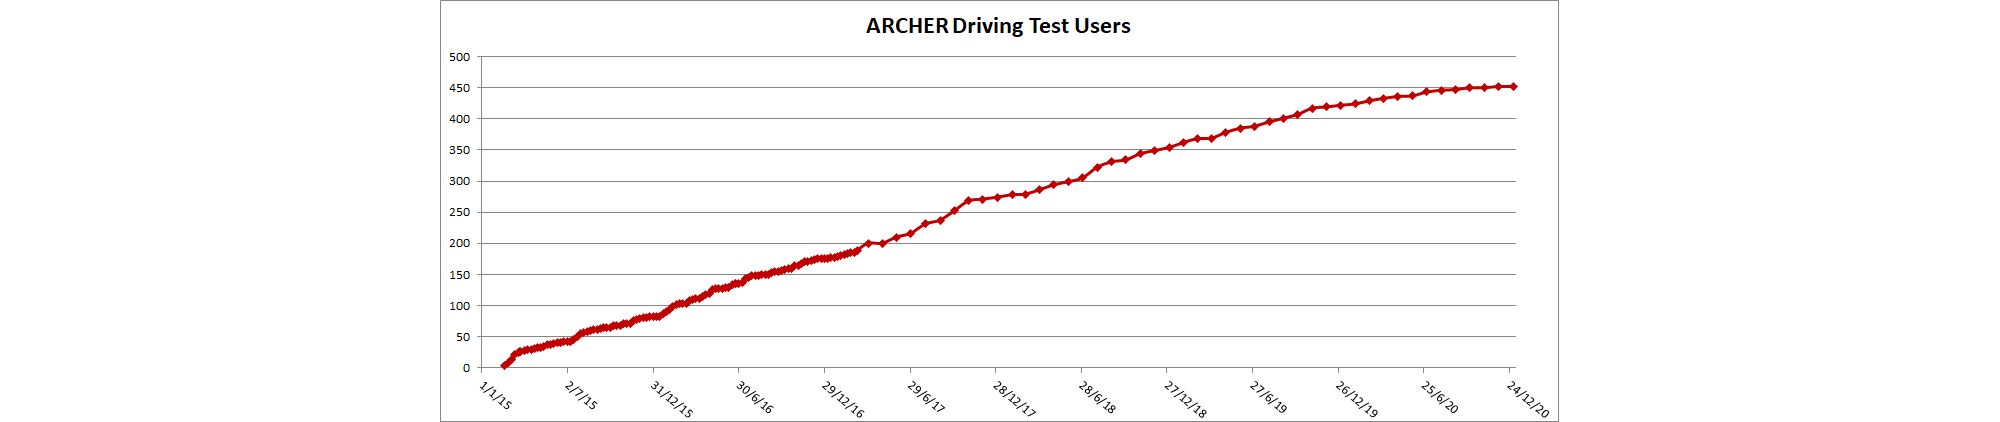 ARCHER Driving Test Users